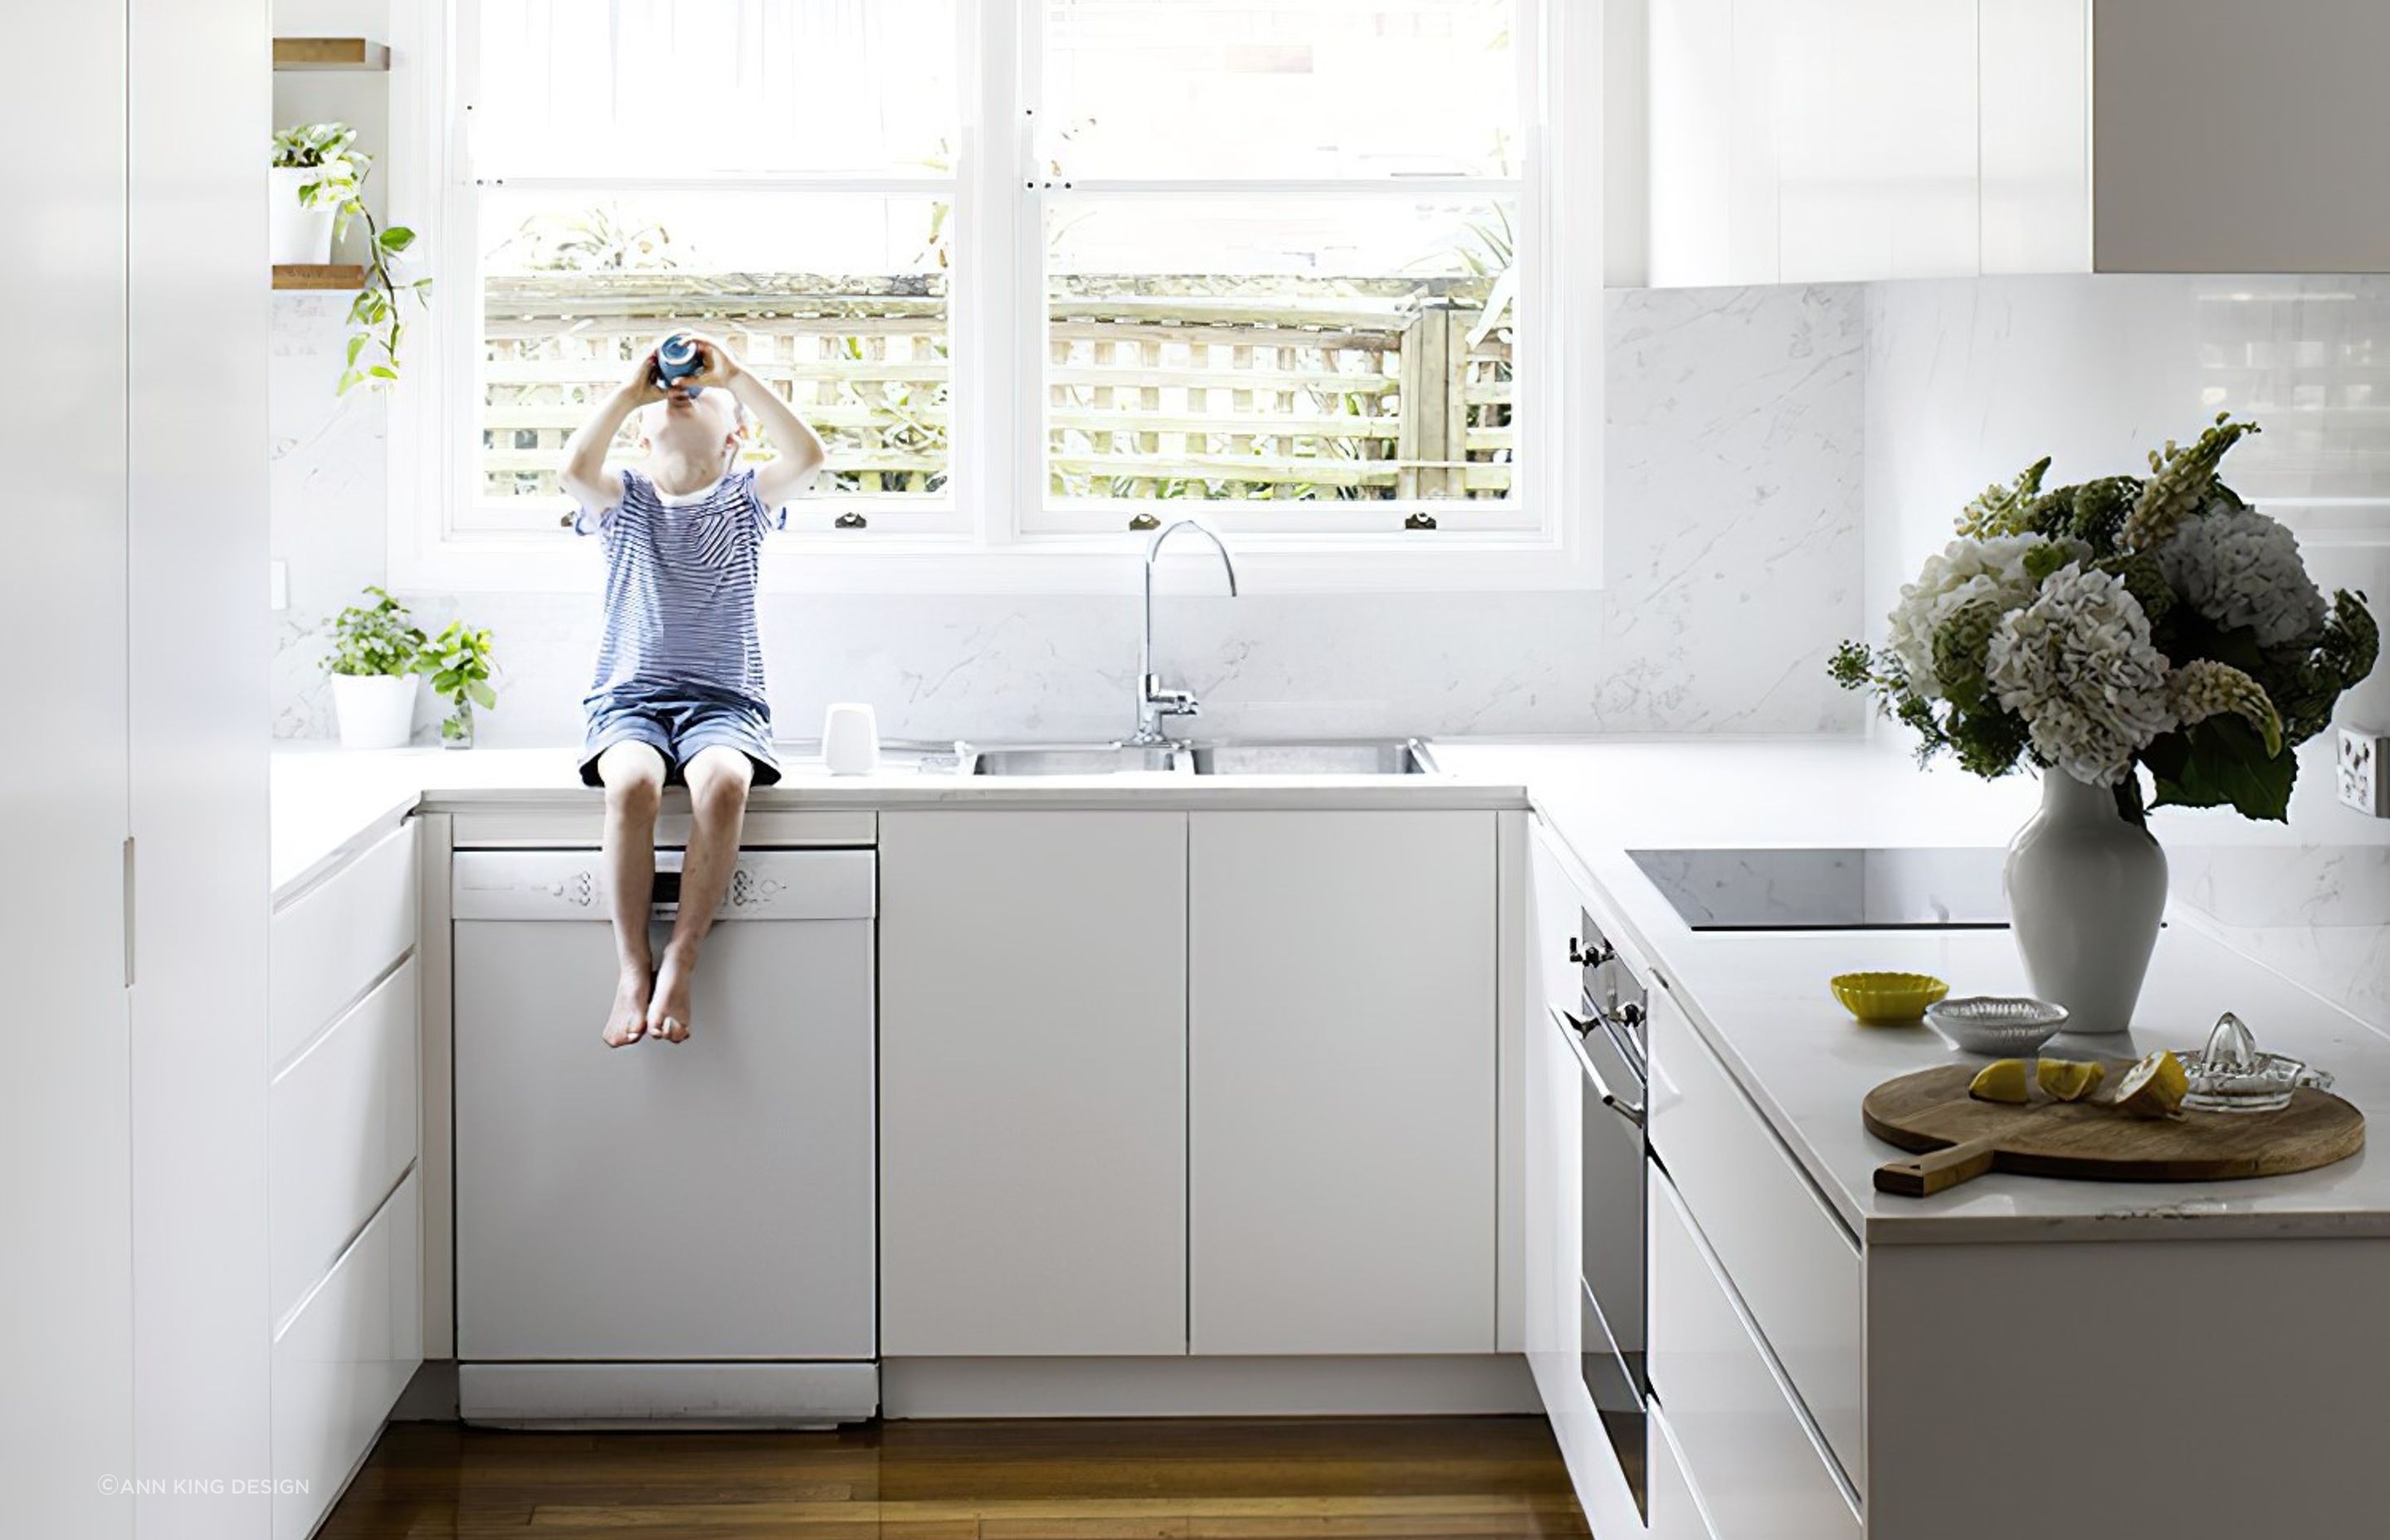 Making use of floor cabinets is key in a cosy kitchen like this one in Neutral Bay